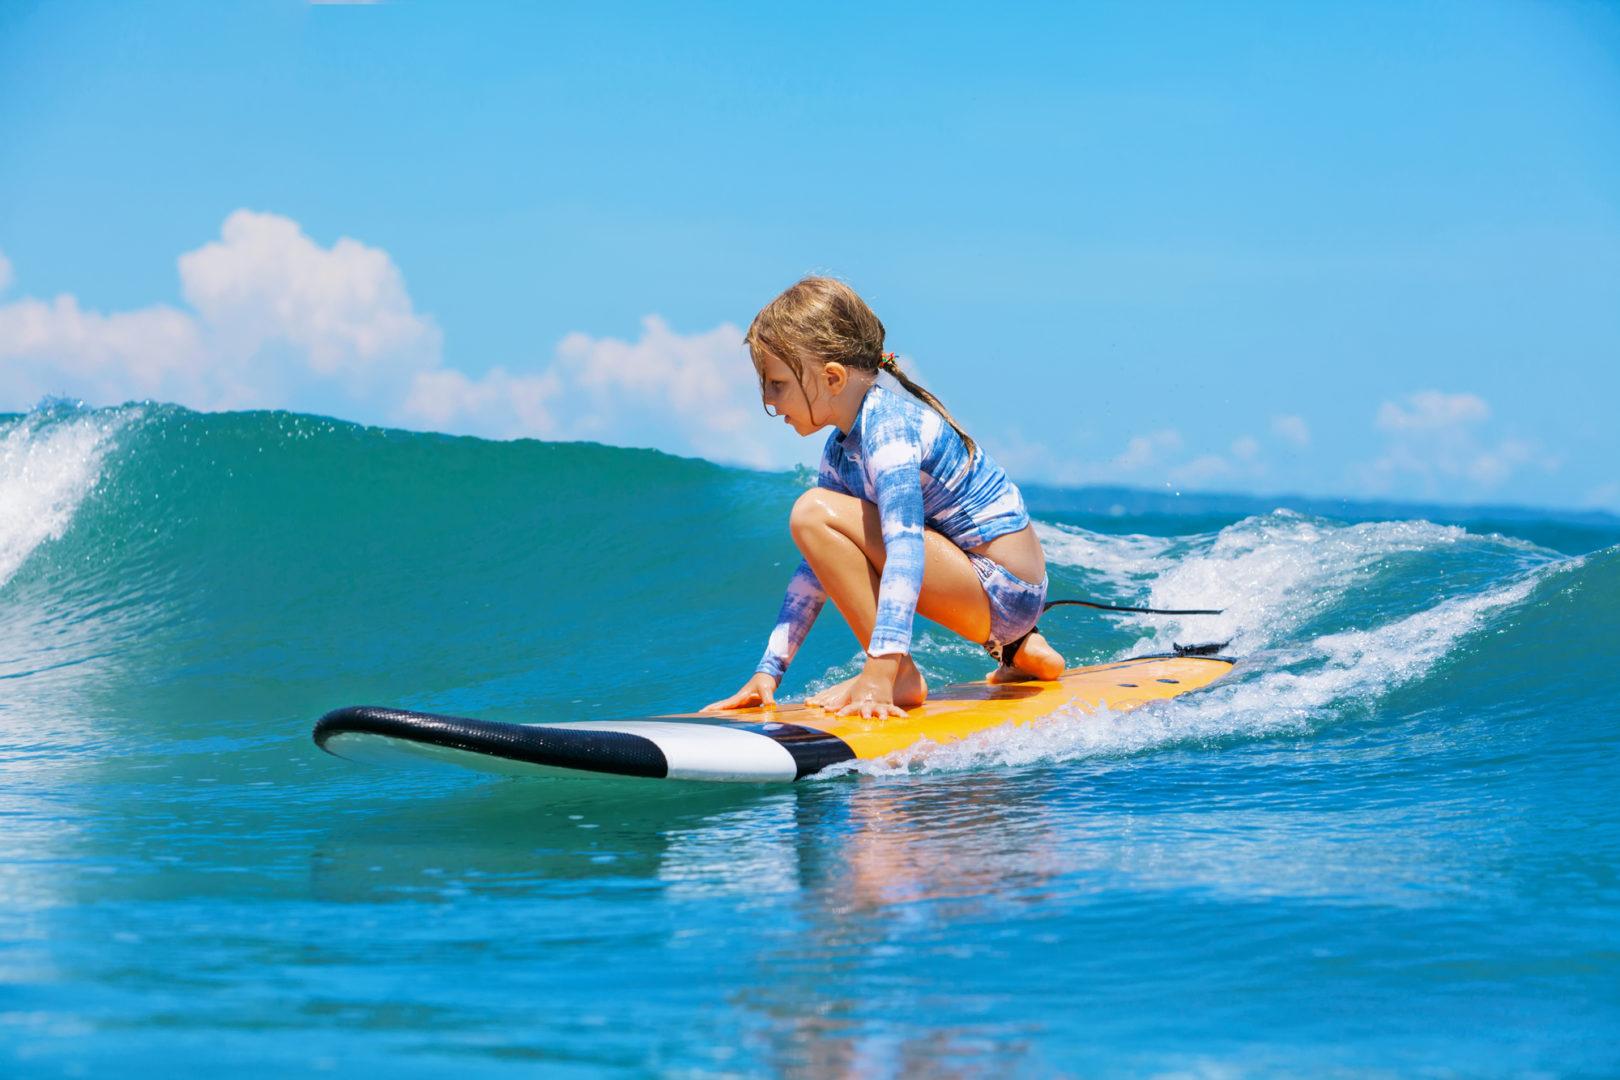 25 Best Things to Do in Maui with Kids